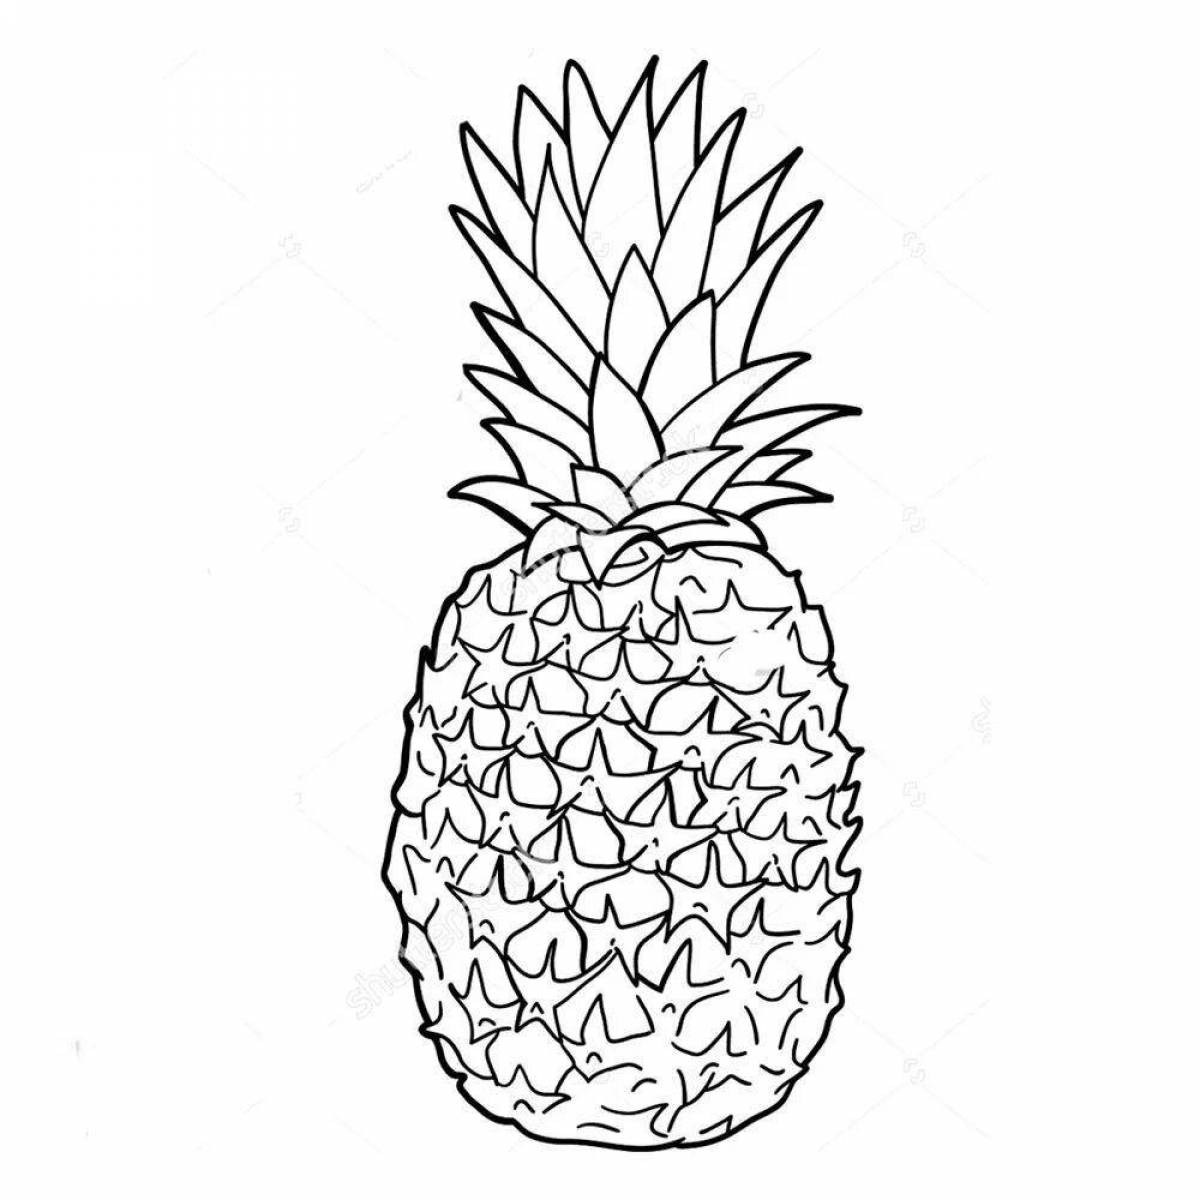 Amazing pineapple coloring pages for kids